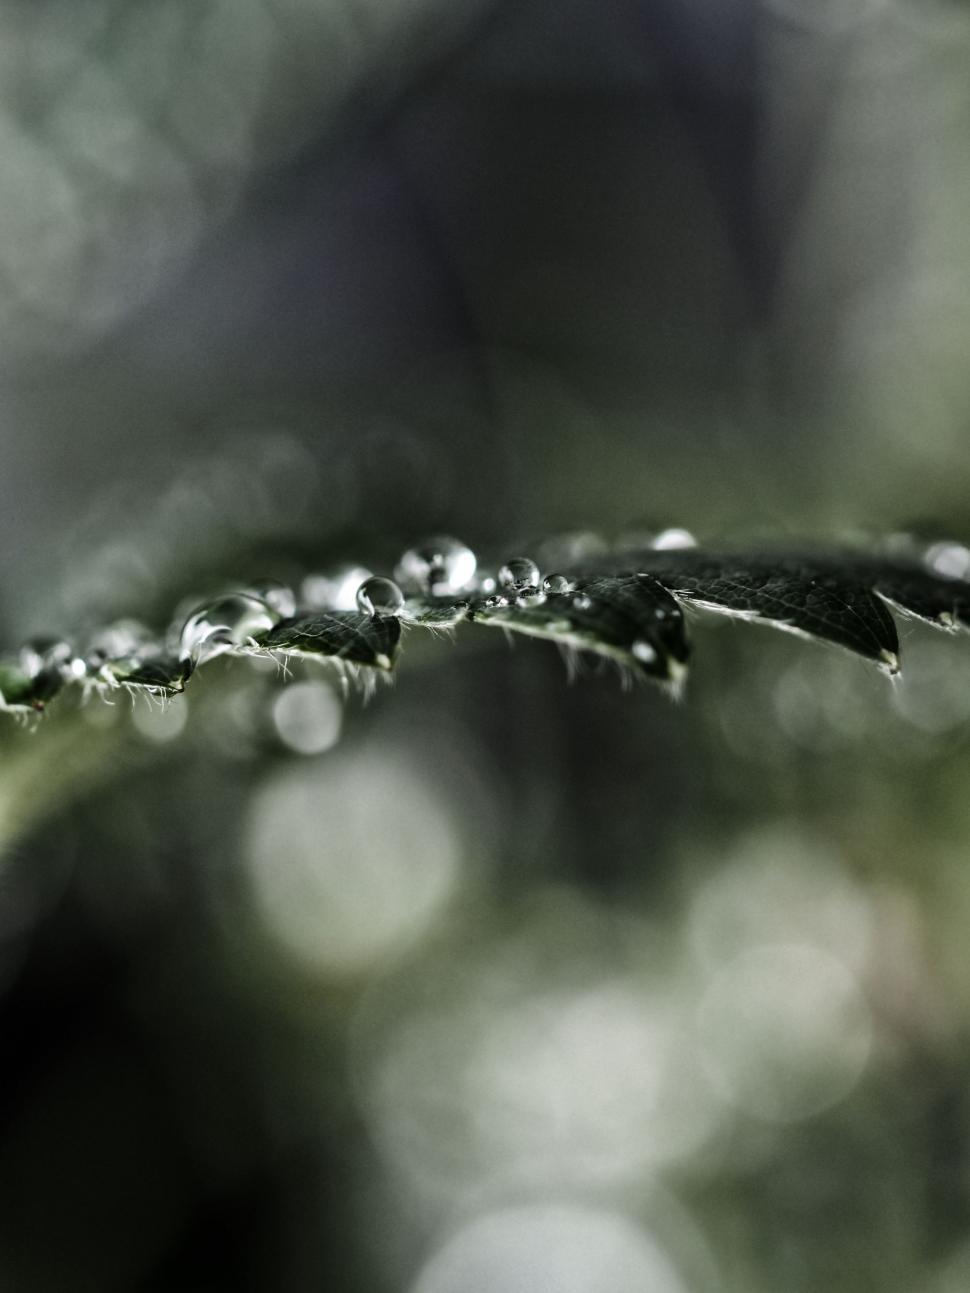 Free Image of Water Droplets on a Leaf 